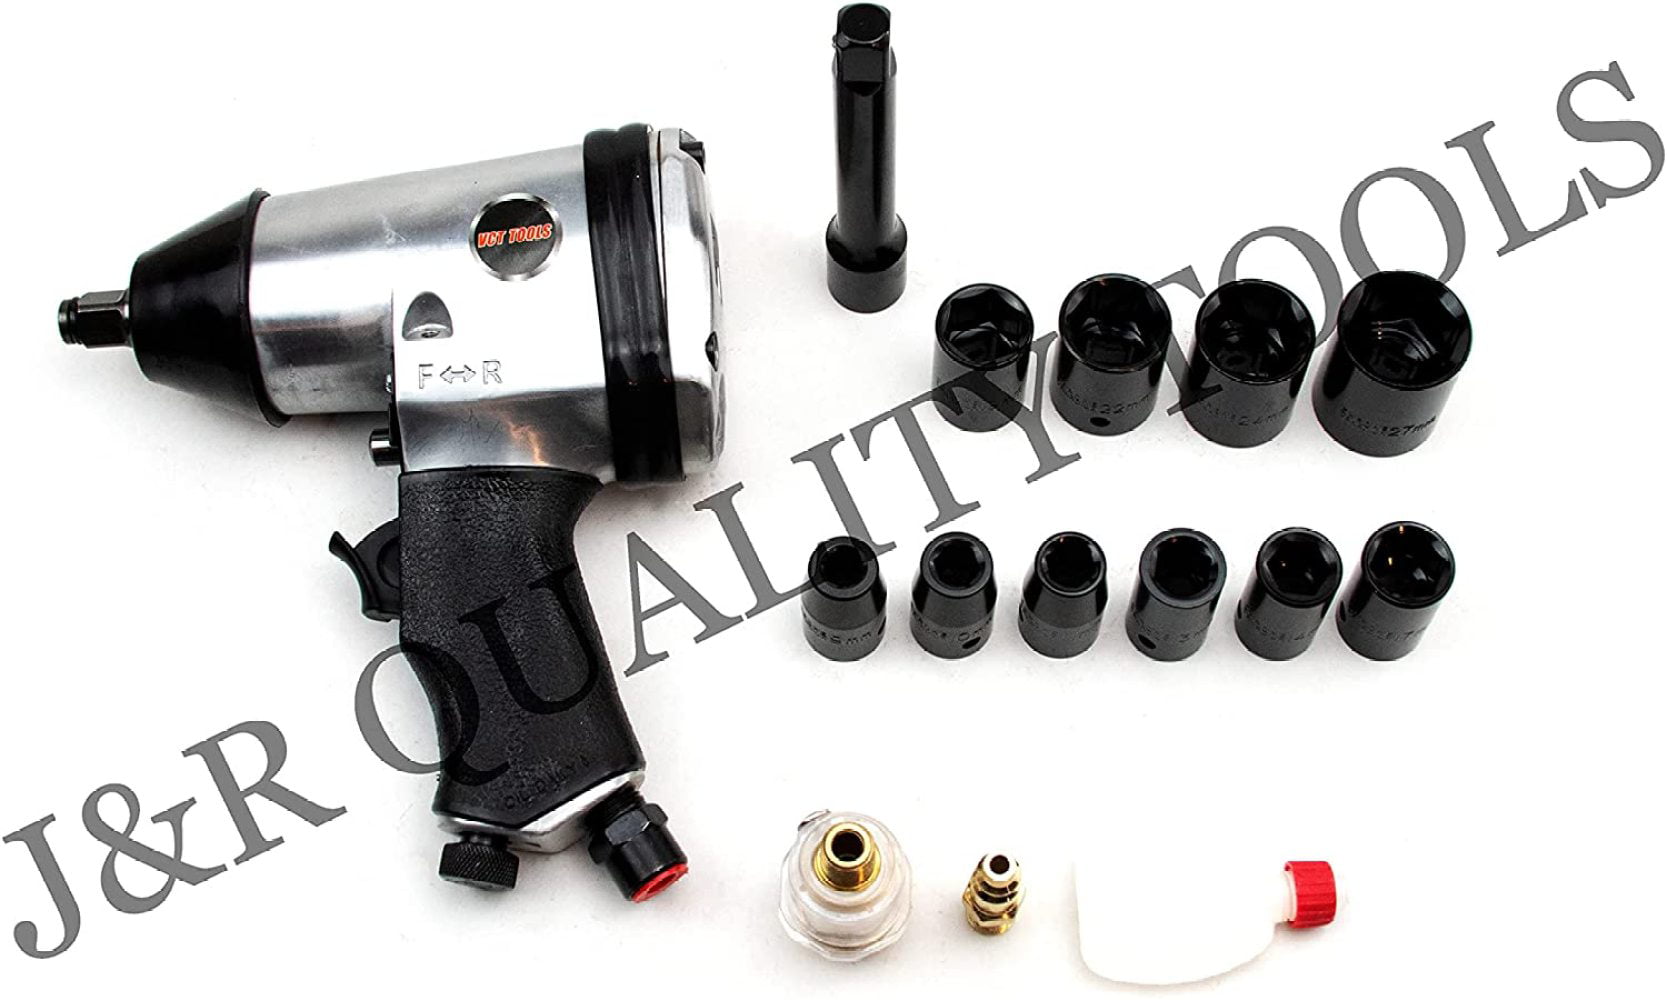 17pc 1/2" Drive AIR IMPACT WRENCH KIT with Socket Set Oil and Tool Case oiler 